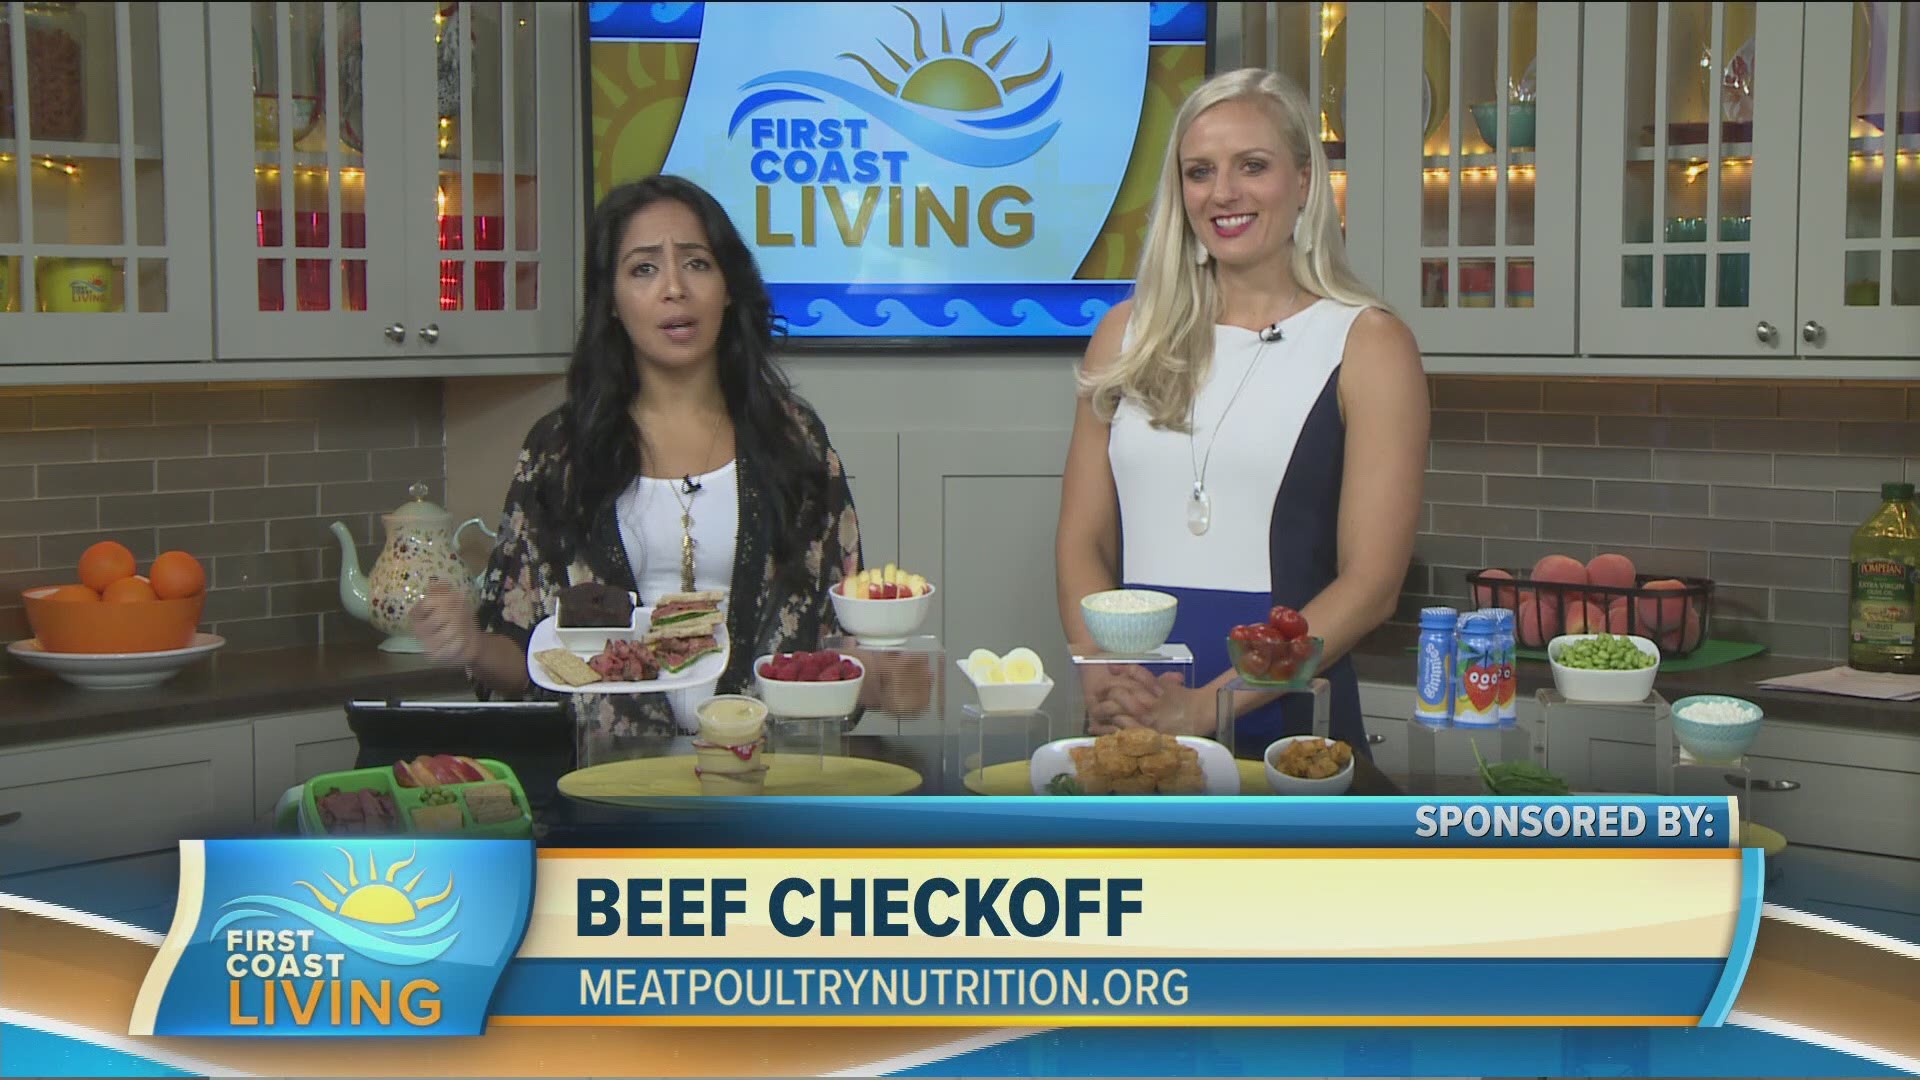 We are a month into the school year and making lunches may already feel like a chore. Jenna Braddock, Registered Dietitian and Blogger, stopped by the FCL studio to help us maximize your kids' school lunches.